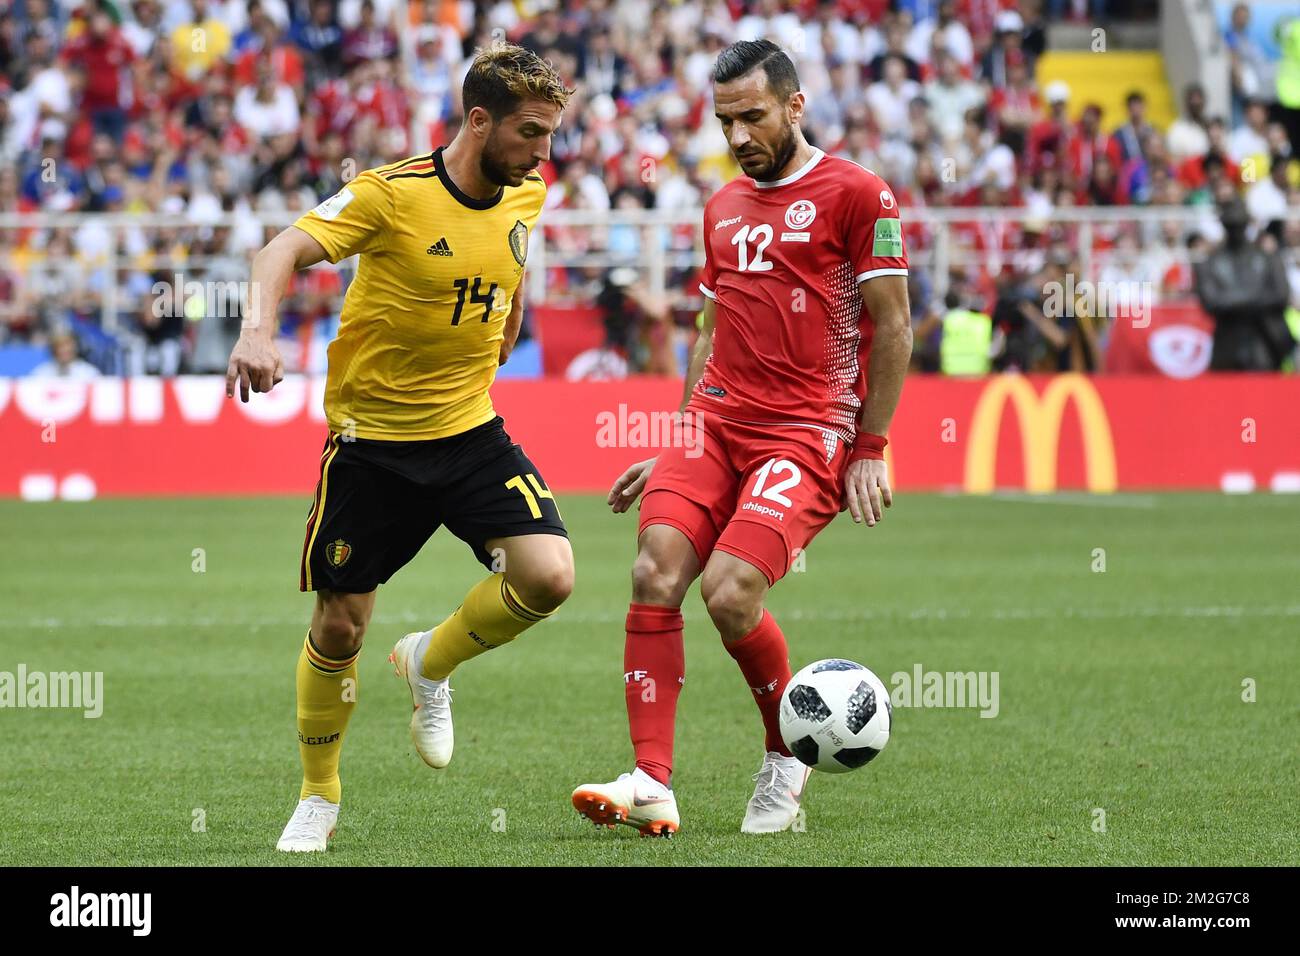 Belgium's Dries Mertens and Tunesia's Ali Maaloul fight for the ball during the second game of Belgian national soccer team the Red Devils against Tunisia national team in the Spartak stadium, in Moscow, Russia, Saturday 23 June 2018. Belgium won its first group phase game. BELGA PHOTO DIRK WAEM Stock Photo